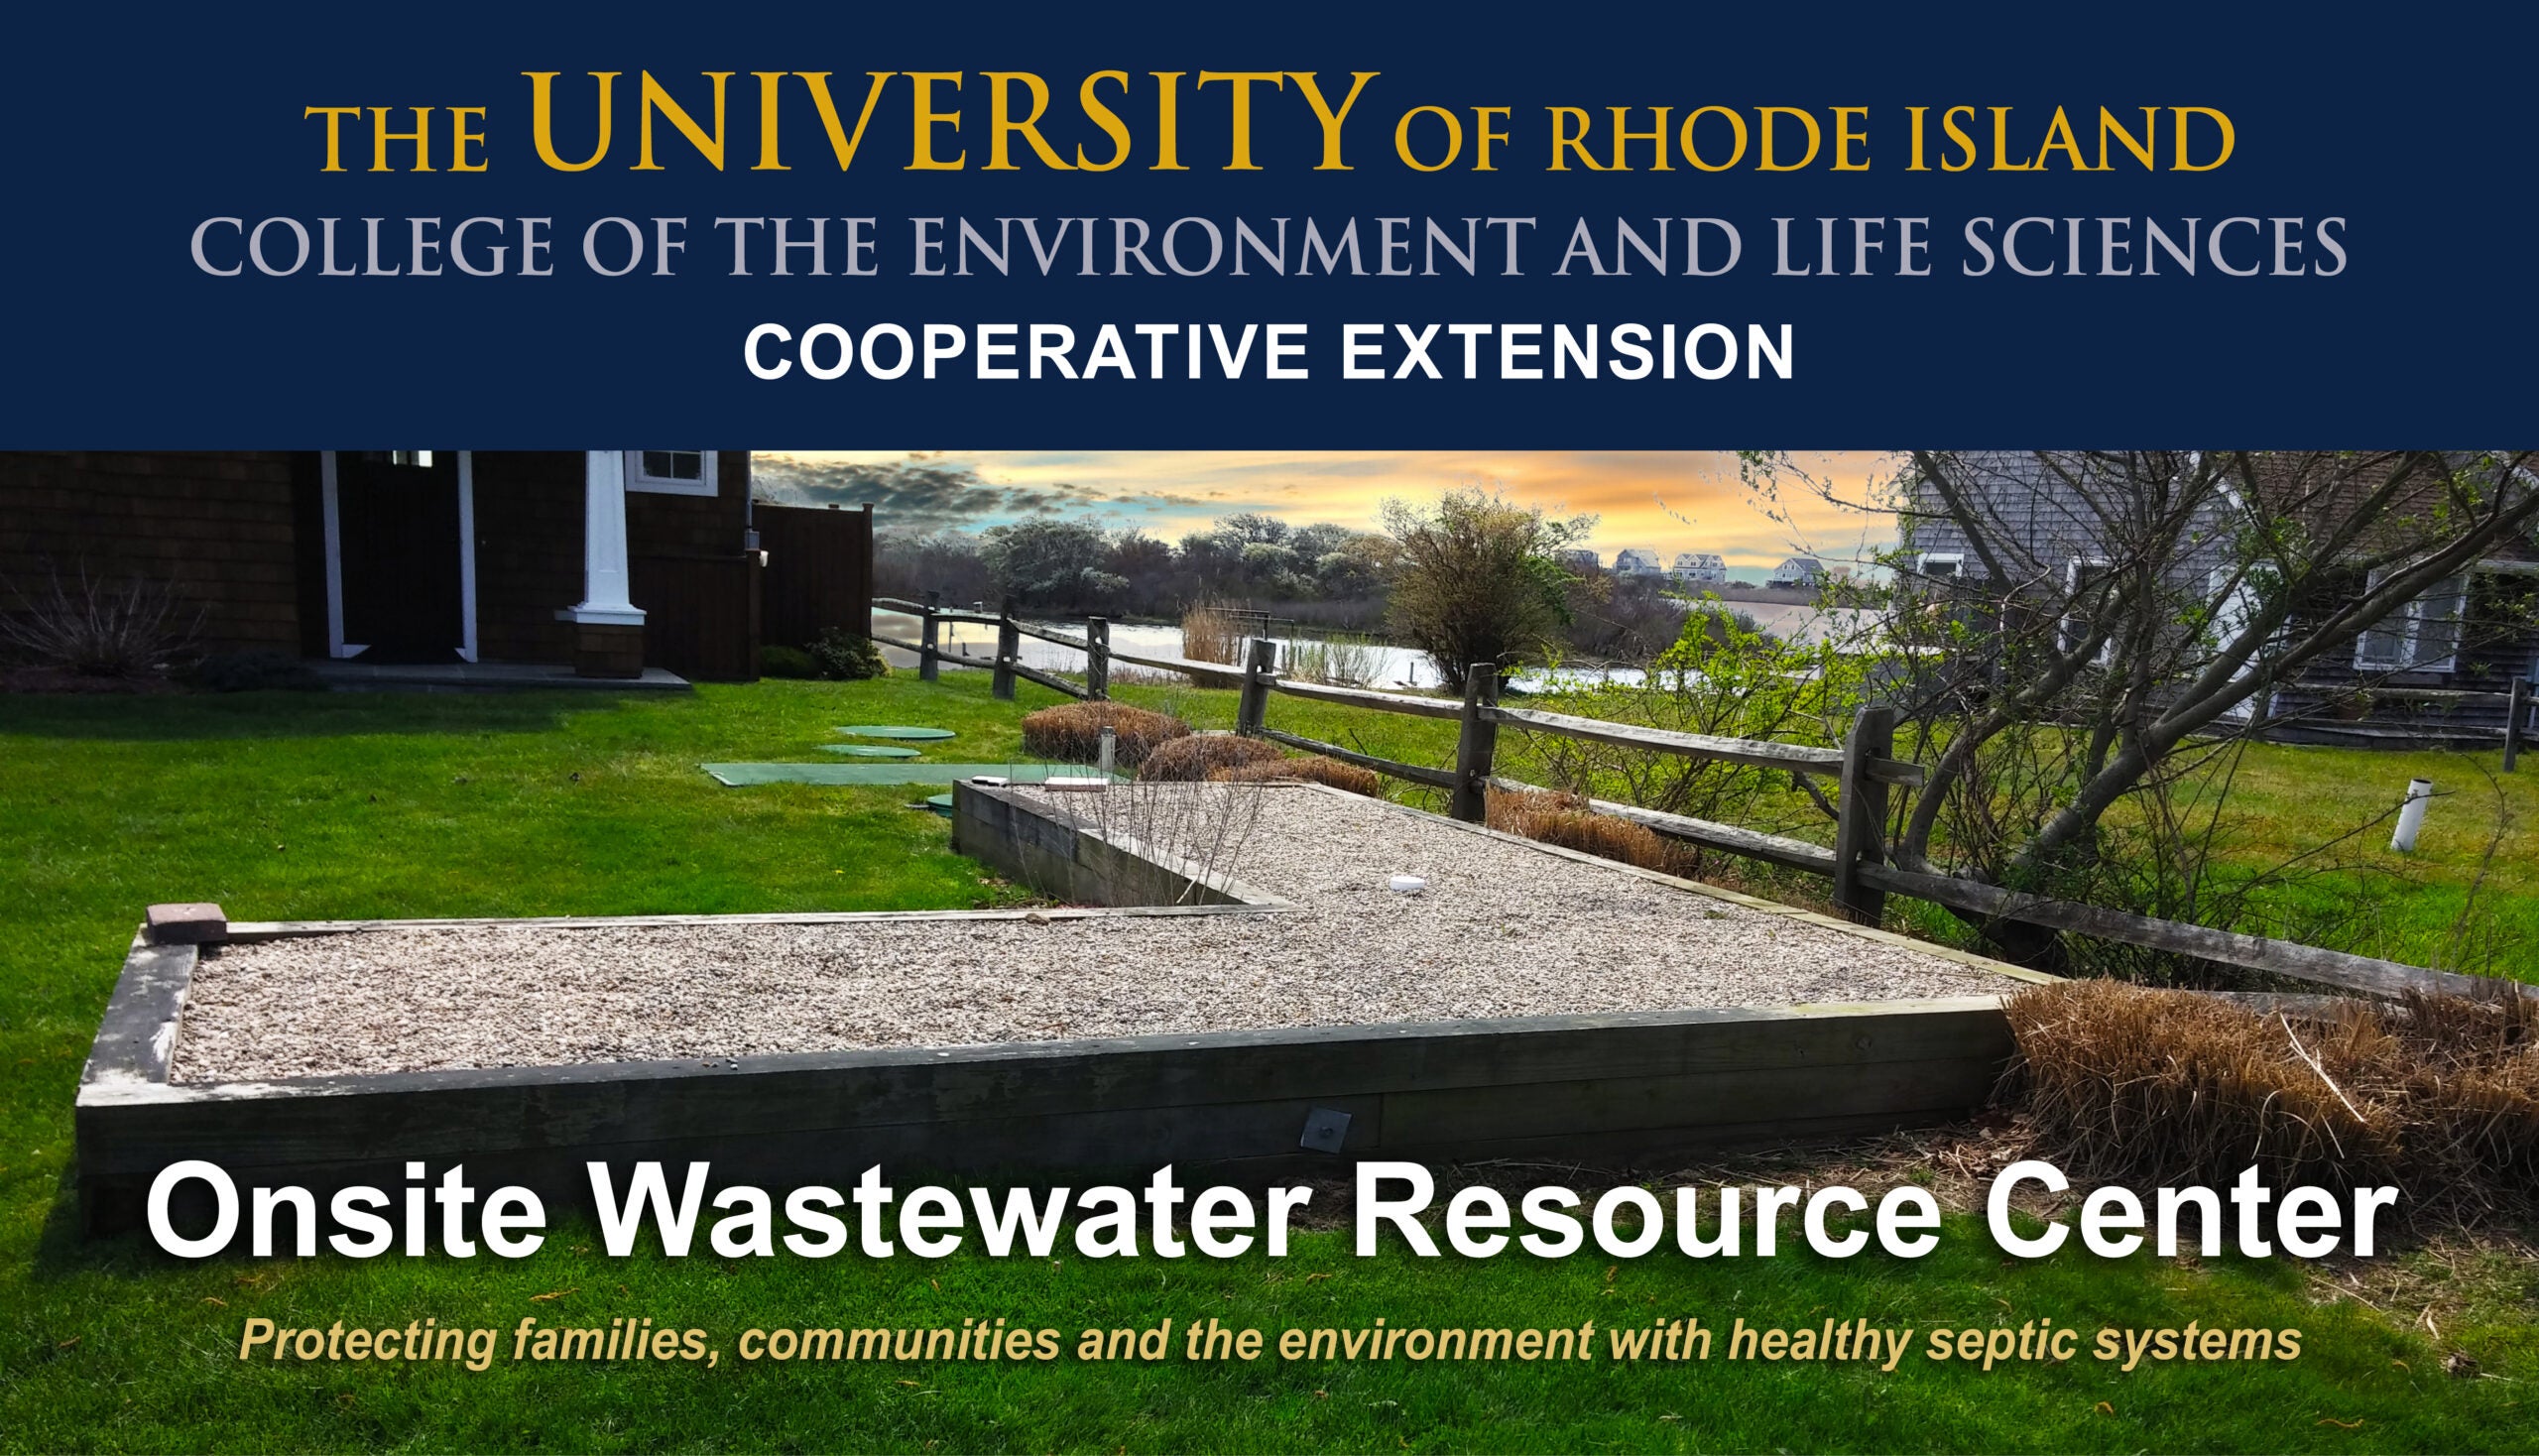 CoopExt+CELS-2023_Onsite-Wastewater-Resource-Center-EmailBanner